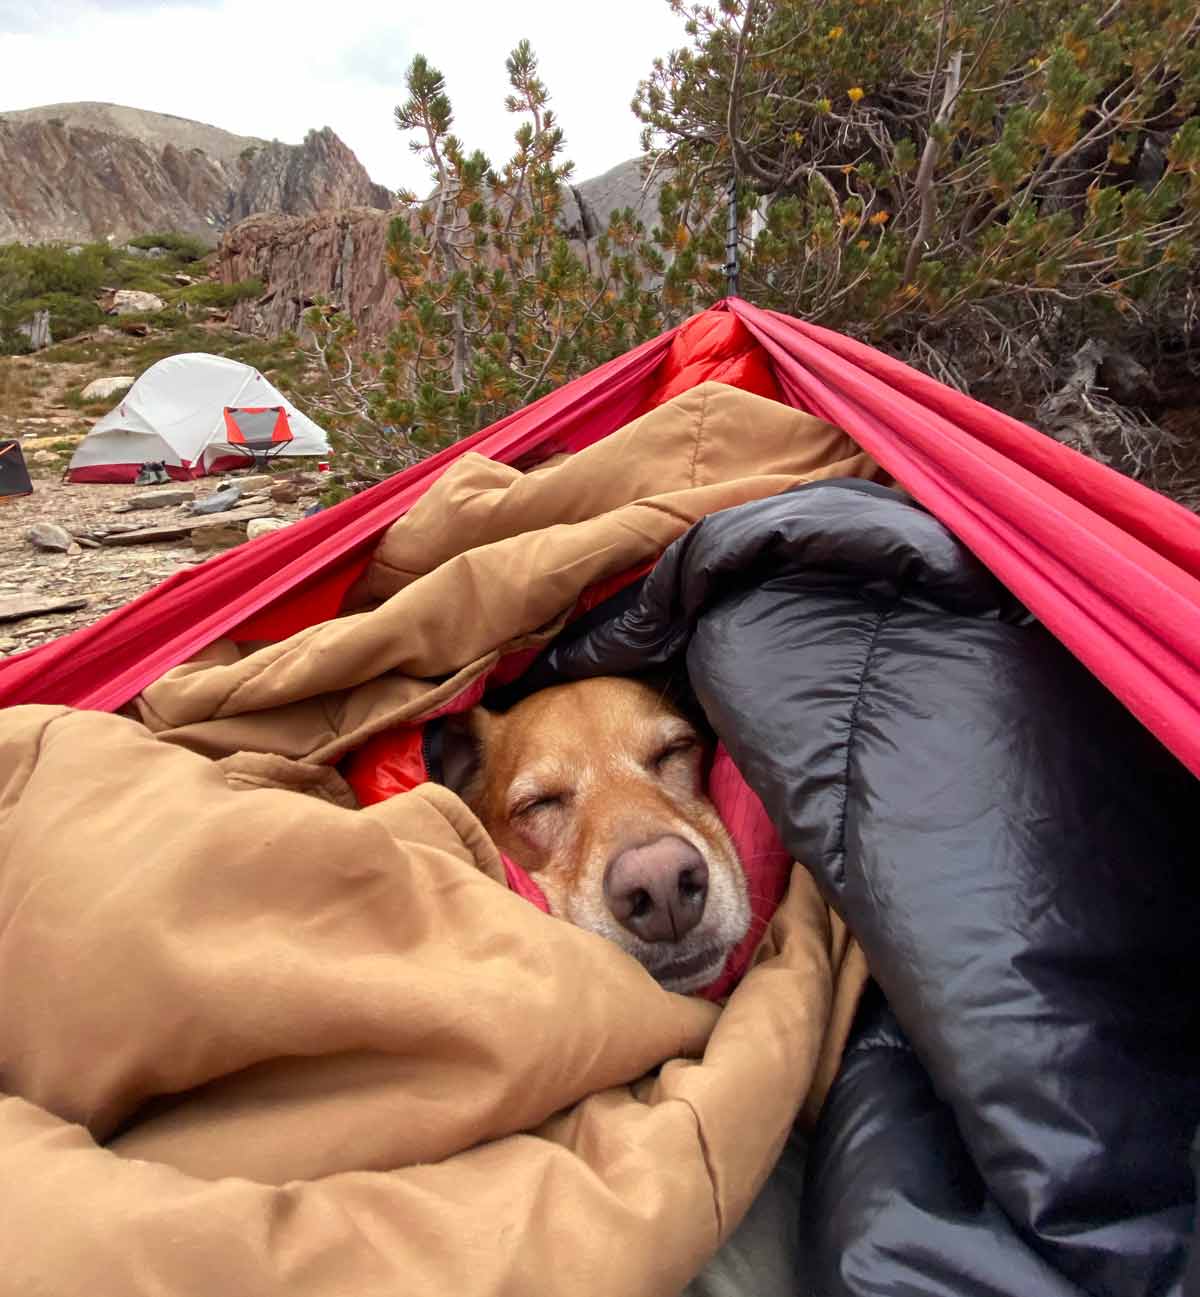 Dog snuggled up in sleeping bags sleeping in a camp hammock with tent in the background.